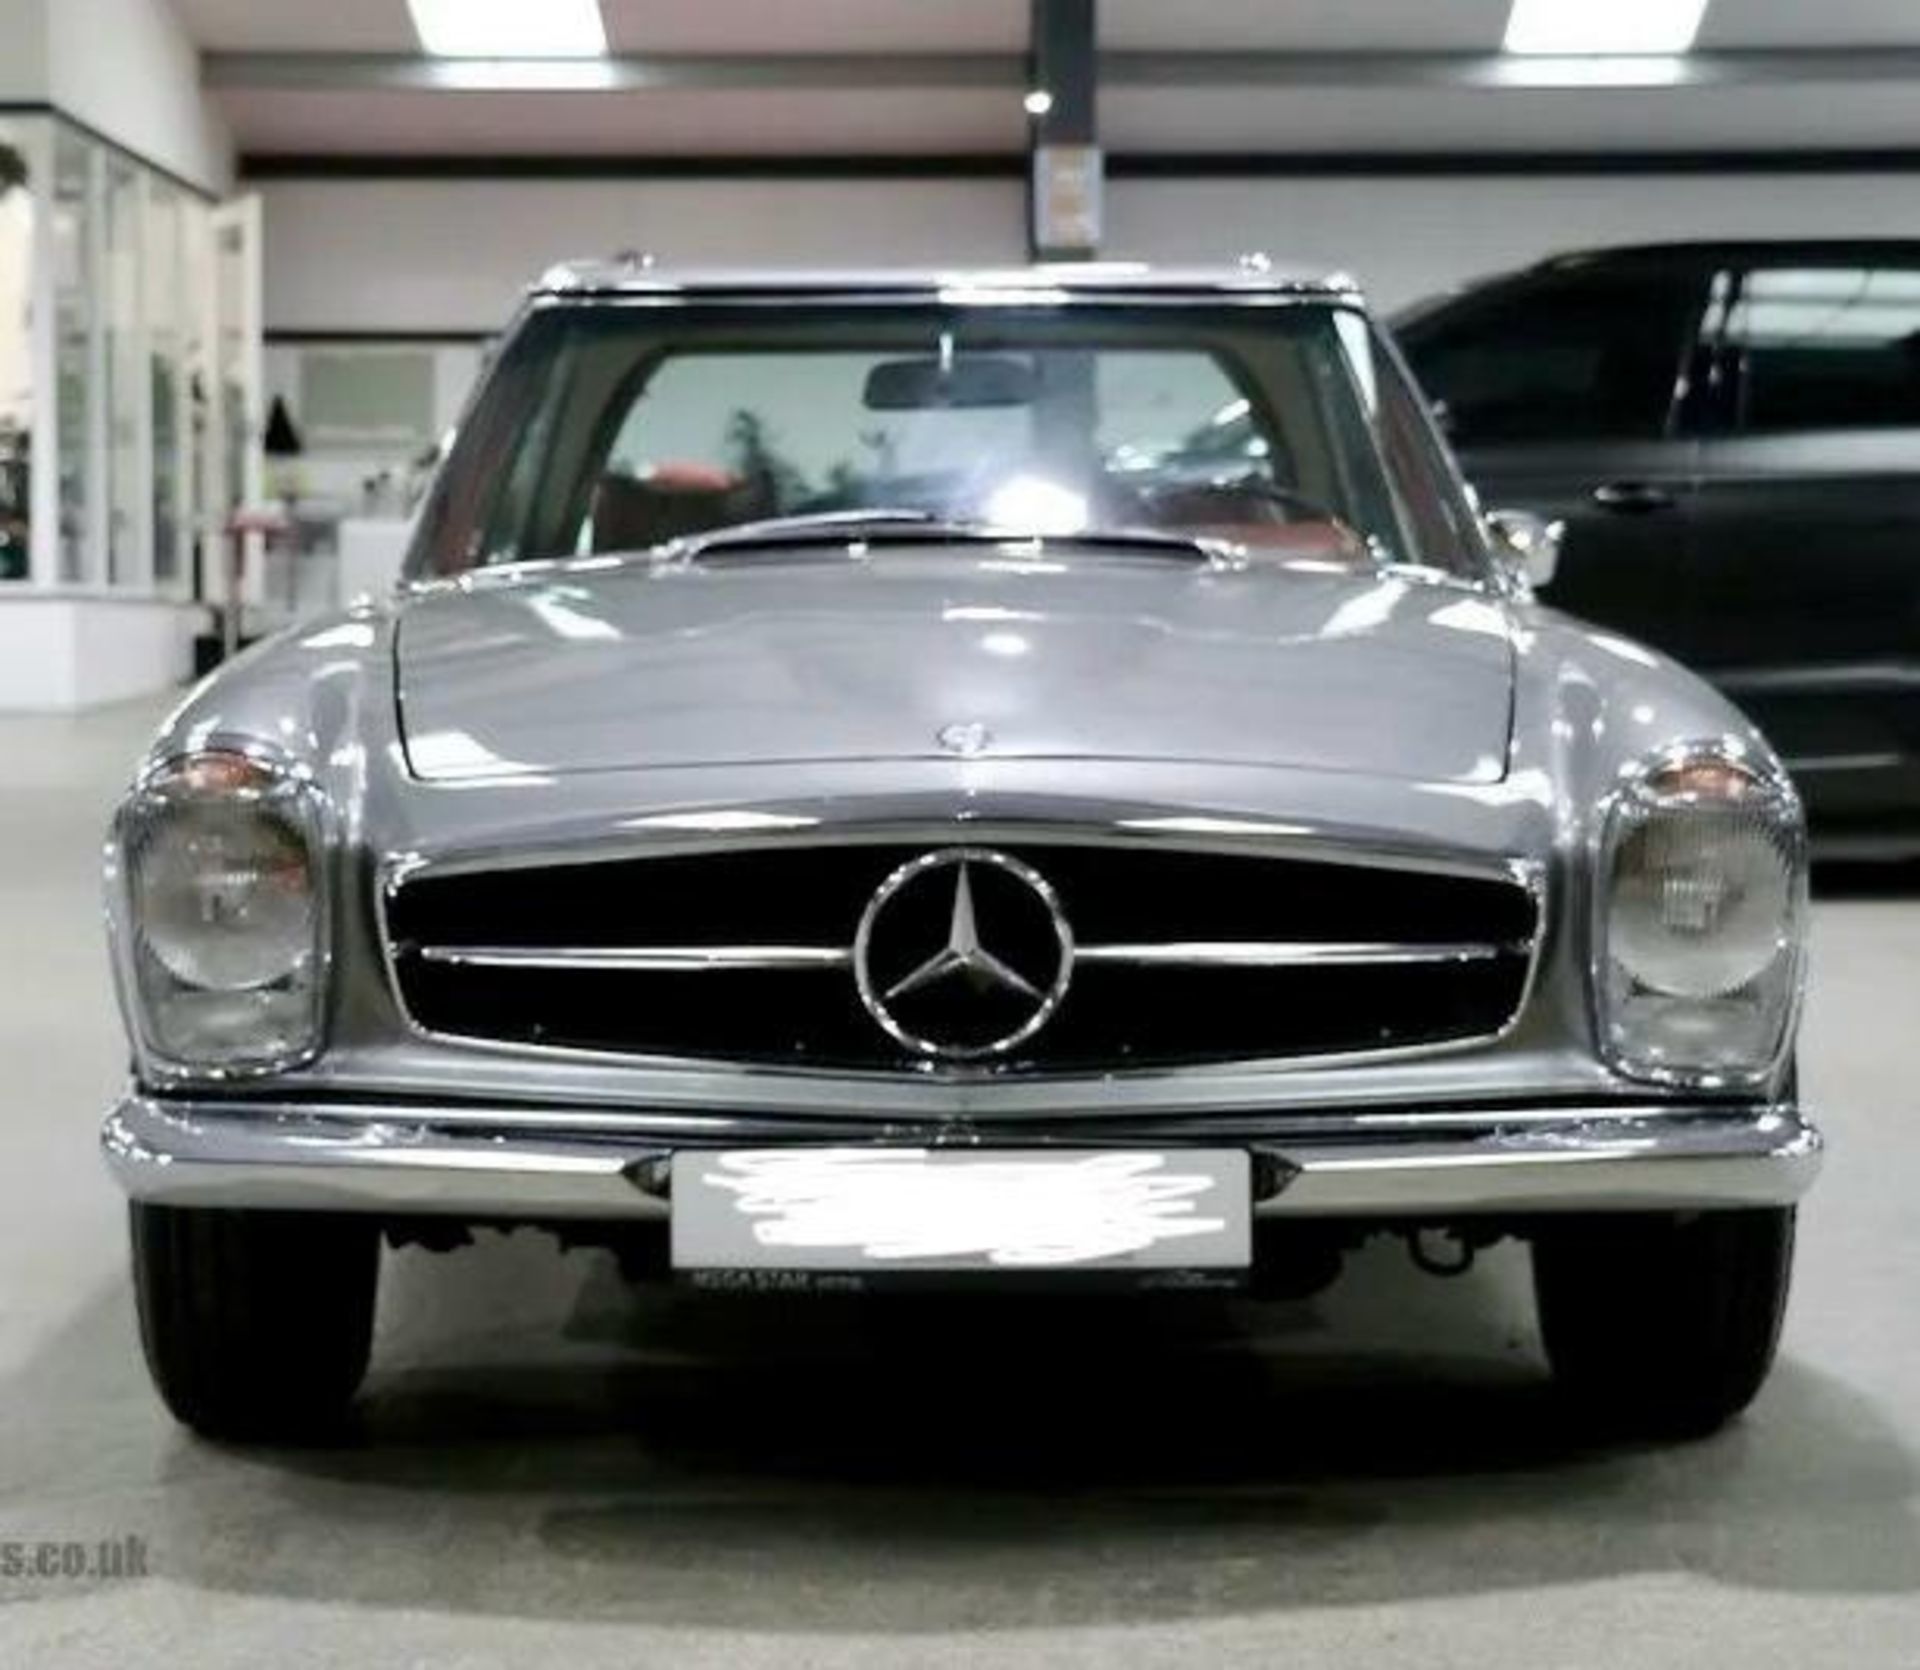 1969 MERCEDES-BENZ 280 SL, LHD MADE IN GERMANY, REGISTERED AND RESTORED IN DUBAI, CAR NOW IN THE UK - Image 2 of 15